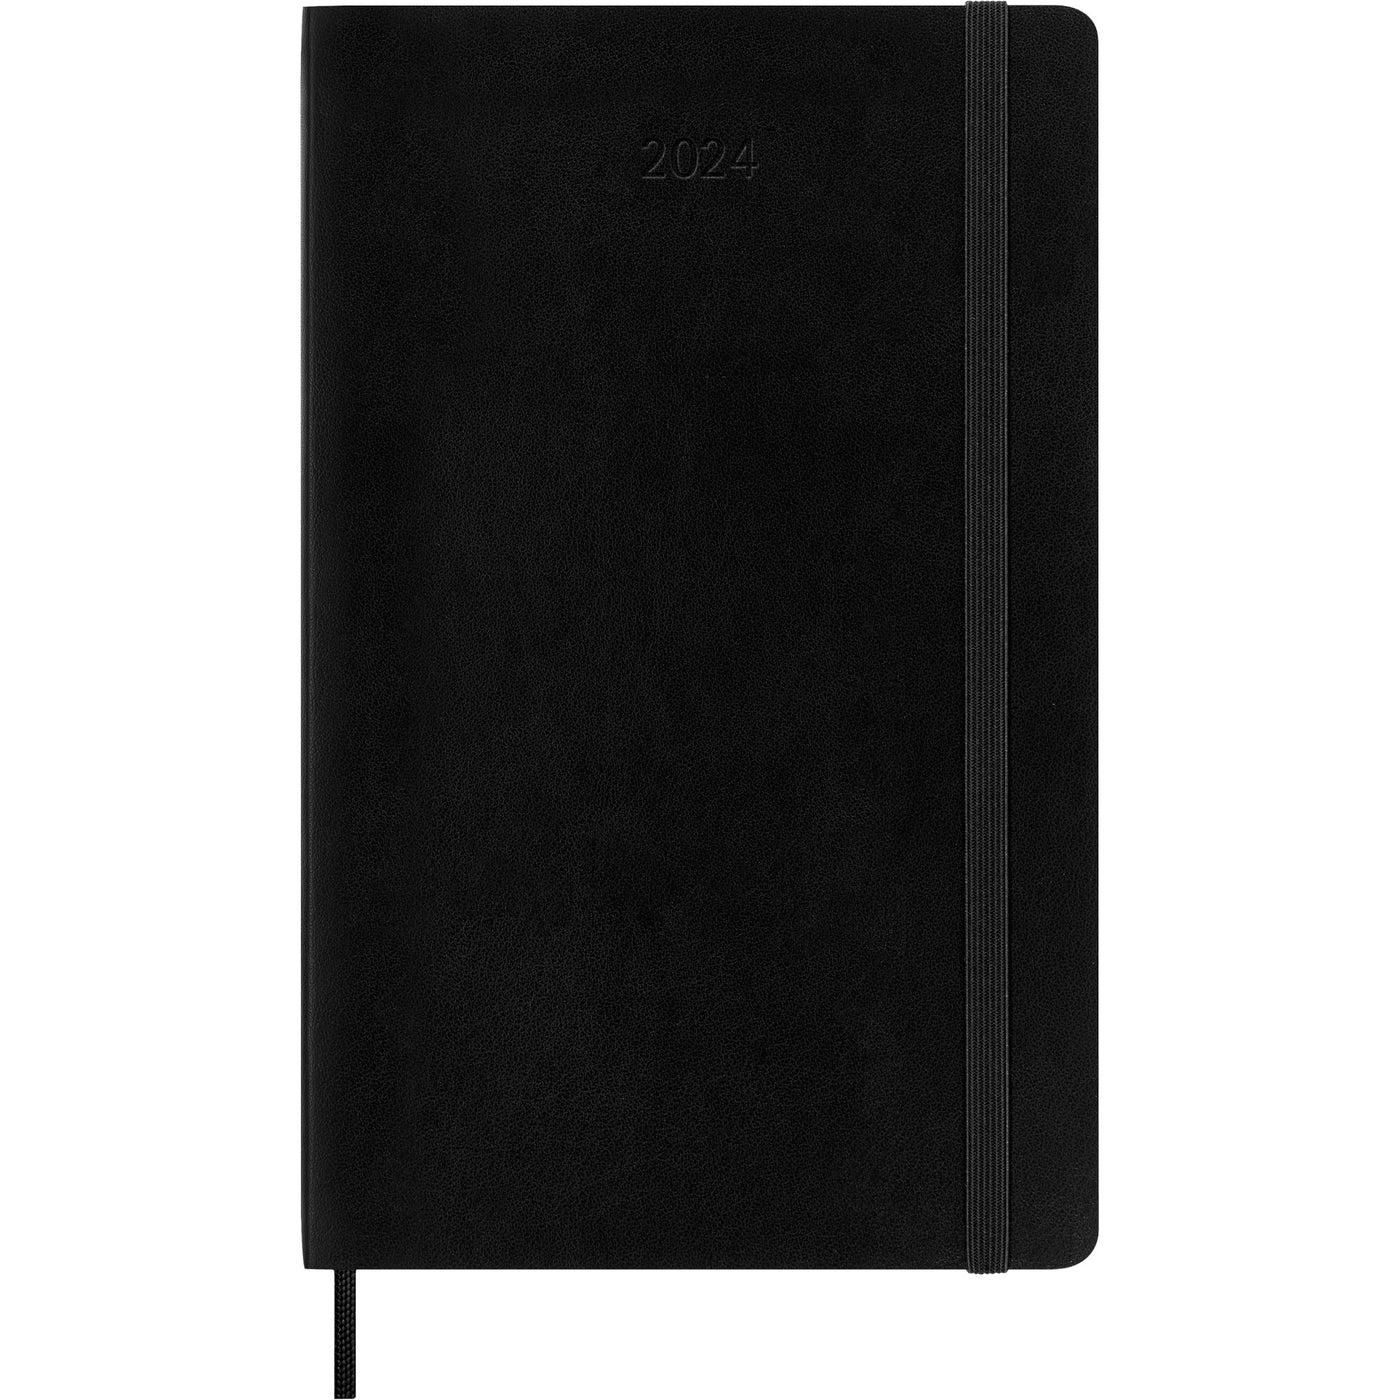 Moleskine Monthly Softcover Planner - Large